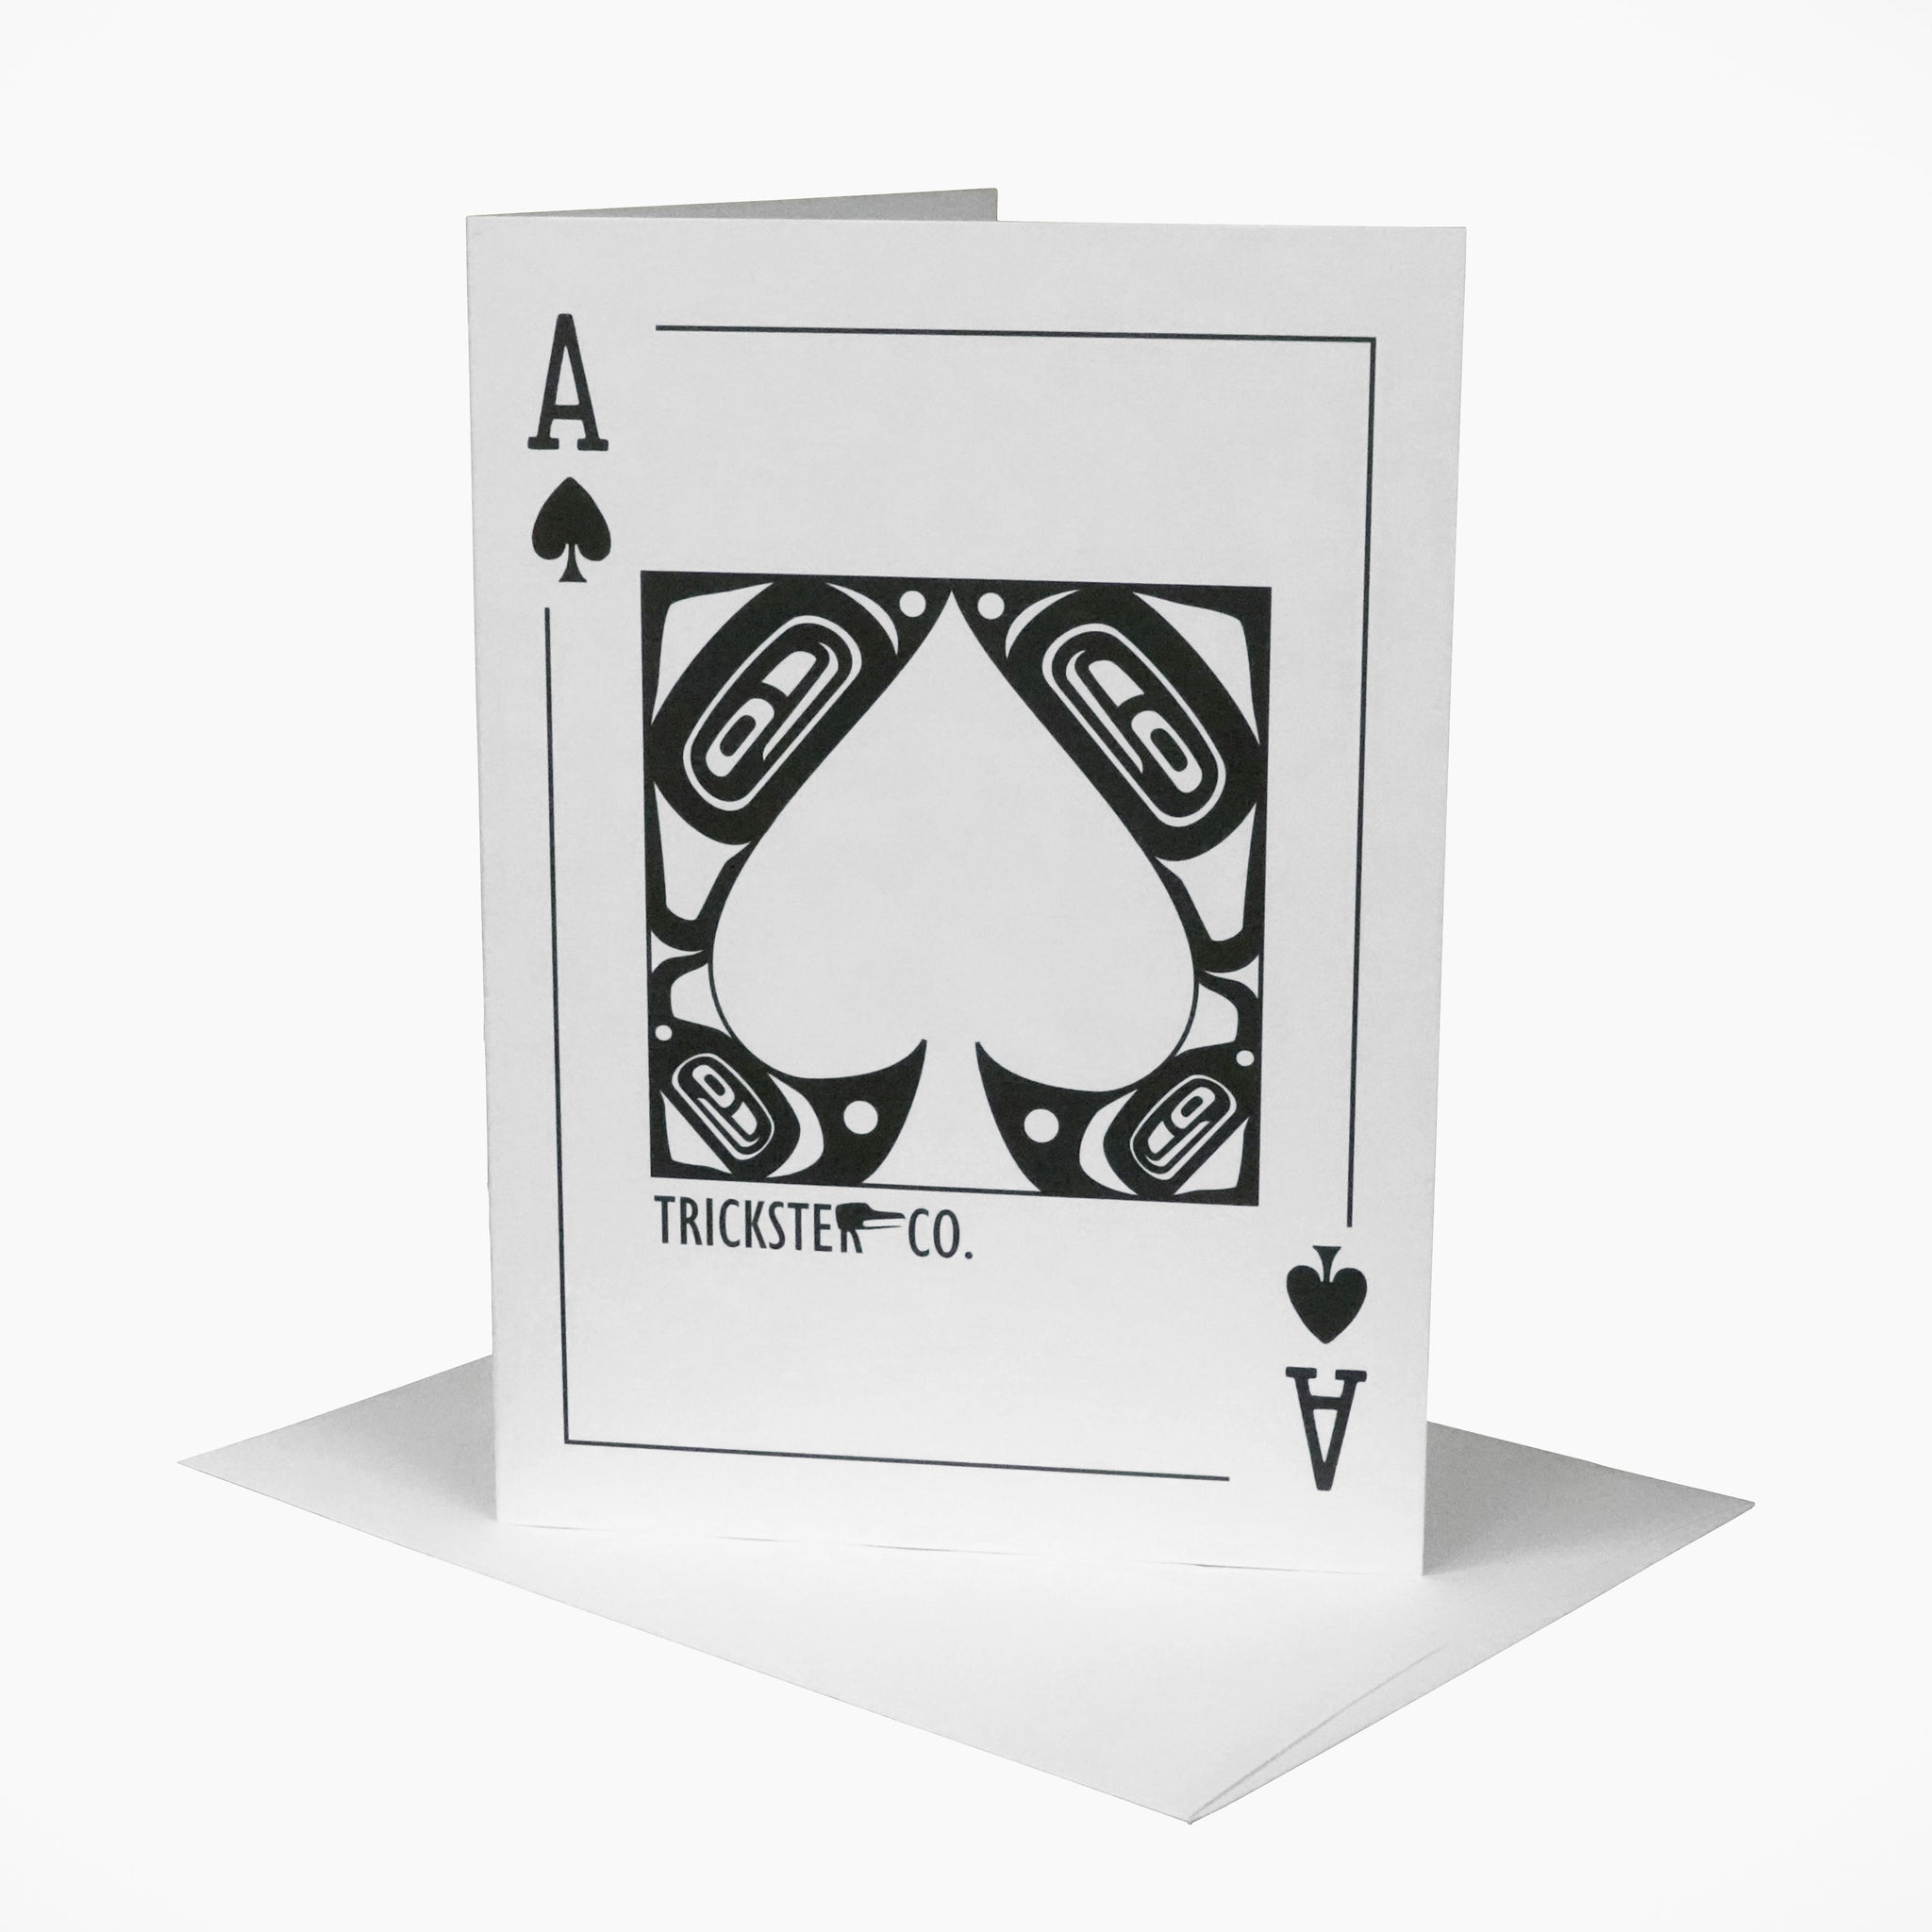 ace of spades playing card